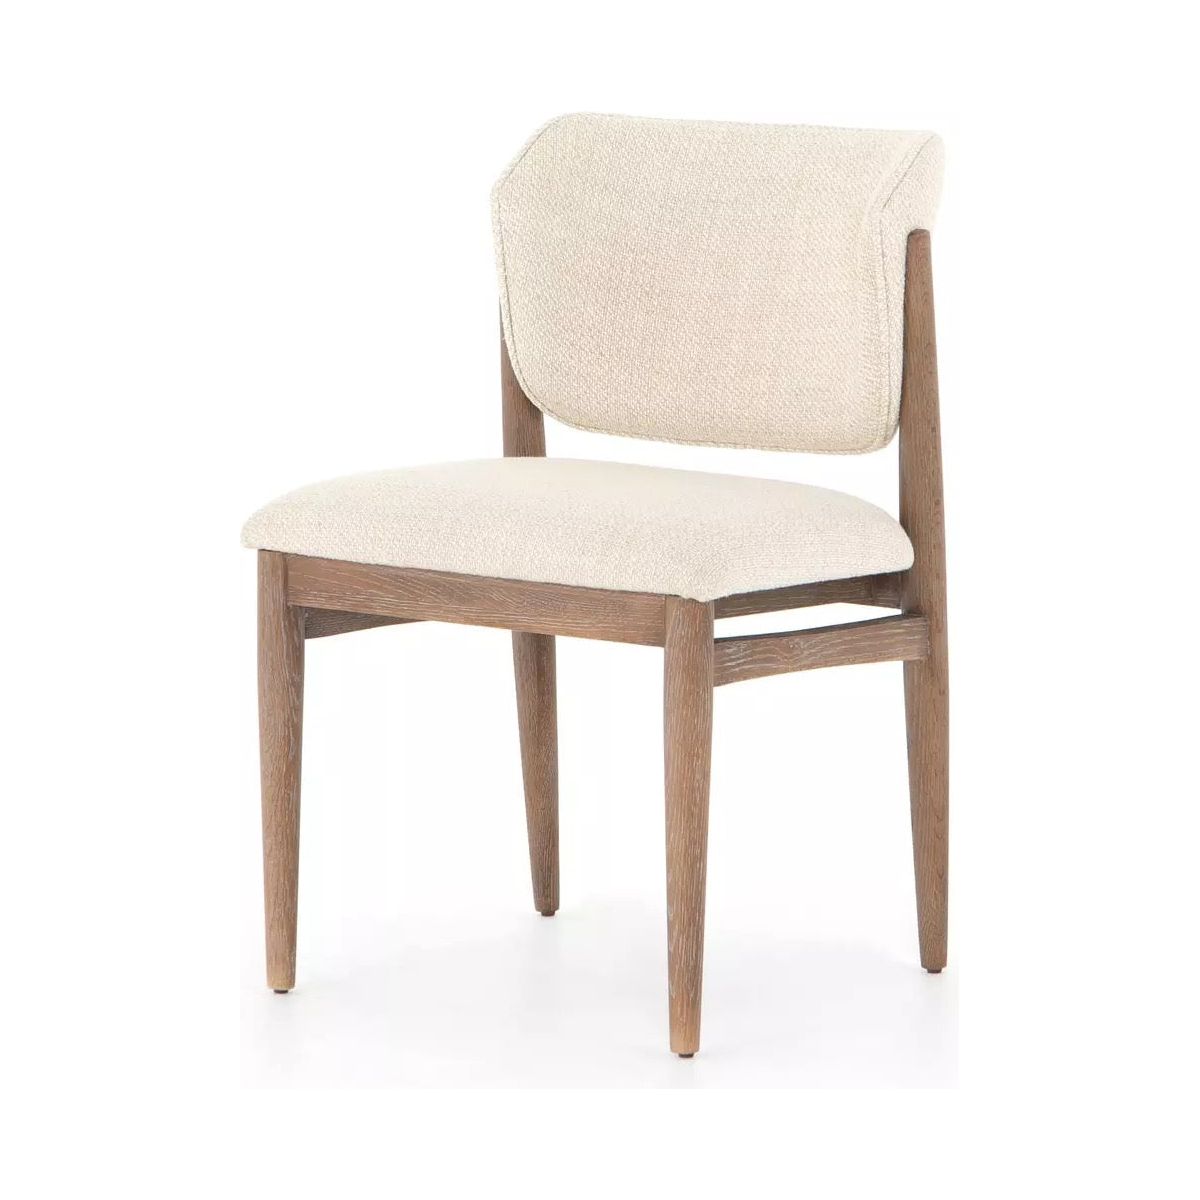 A modern wooden chair with high-performance fabric upholstery in light beige on the seat and backrest, the Joren Dining Chair features a minimalist design with clean lines, tapered legs, and a slightly curved backrest for added comfort. The pecan-finished nettlewood frame complements the fabric beautifully.